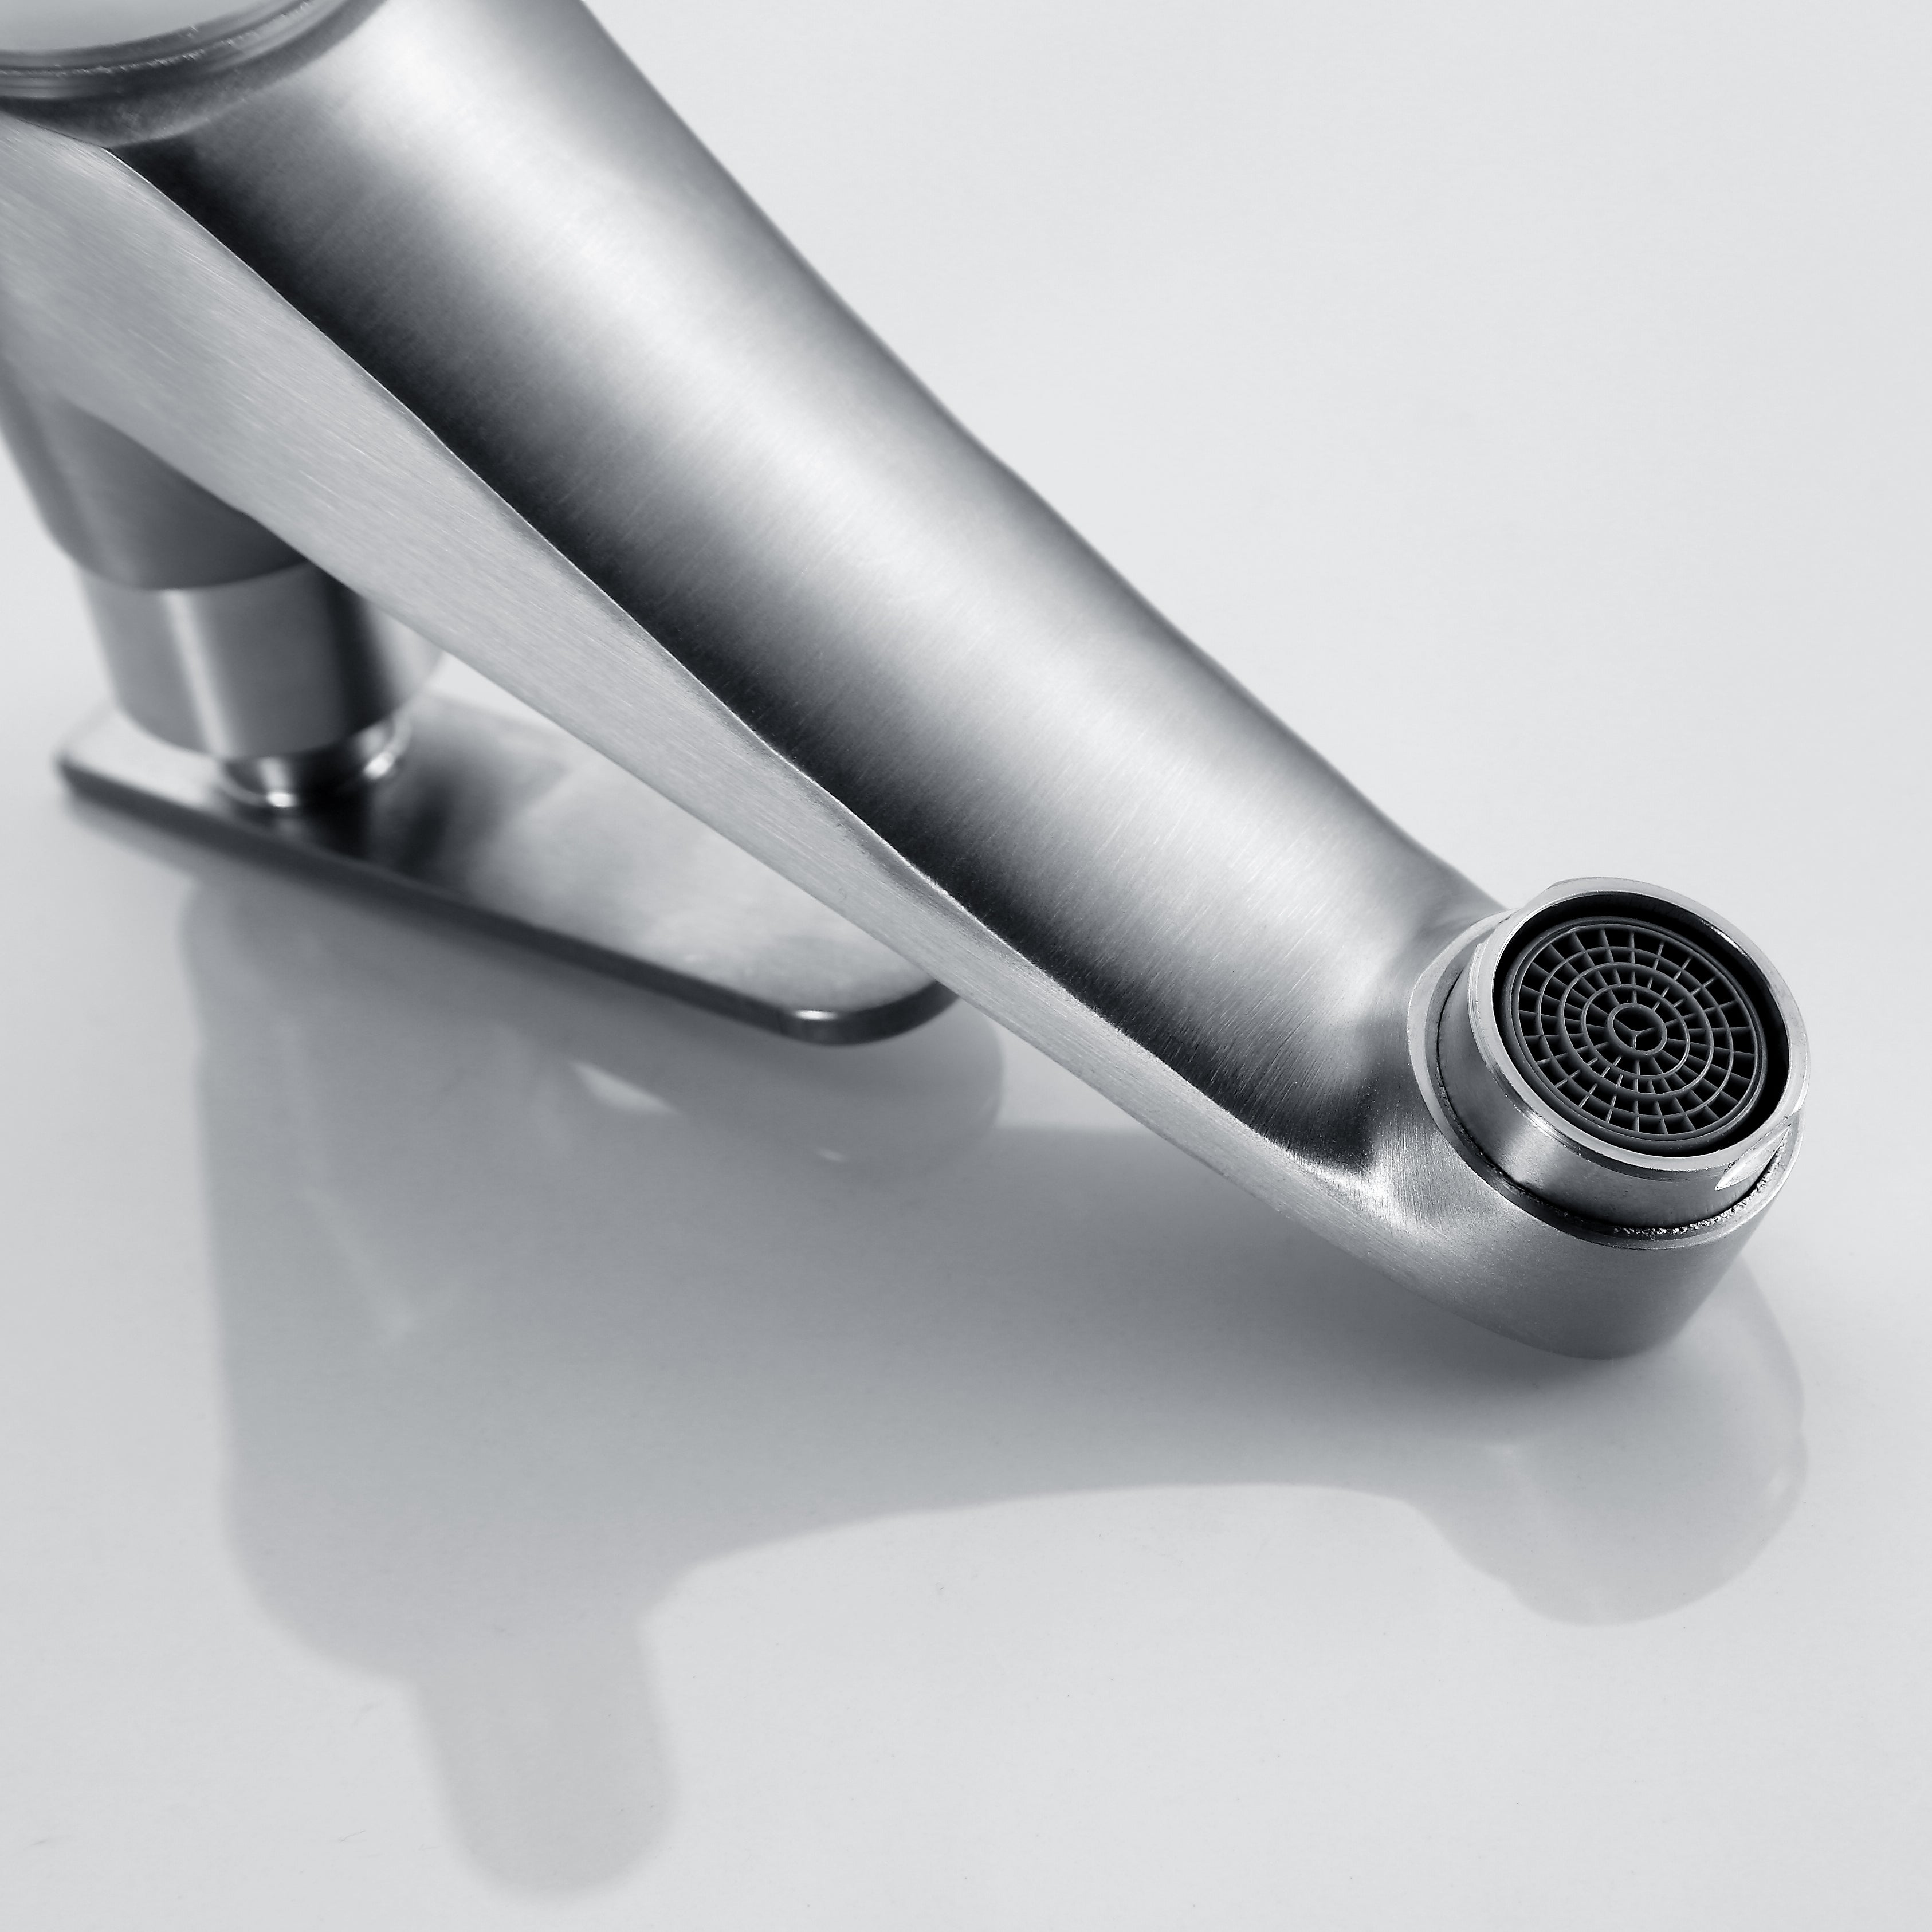 YARRA BASIN FAUCET STAINLESS STEEL